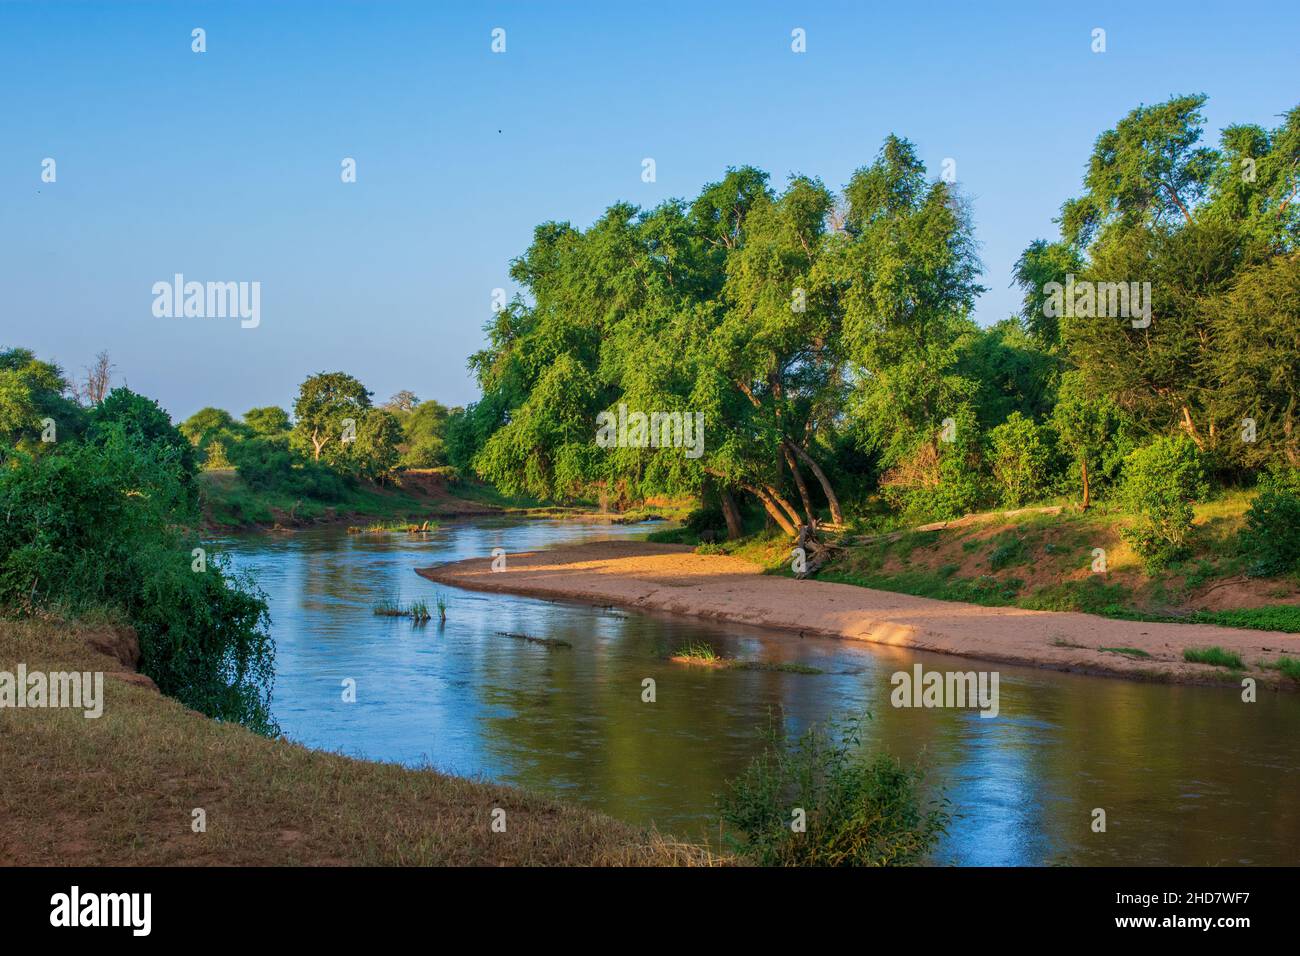 Evening along The Luvuvhu River in Northern Kruger, South Africa Stock Photo